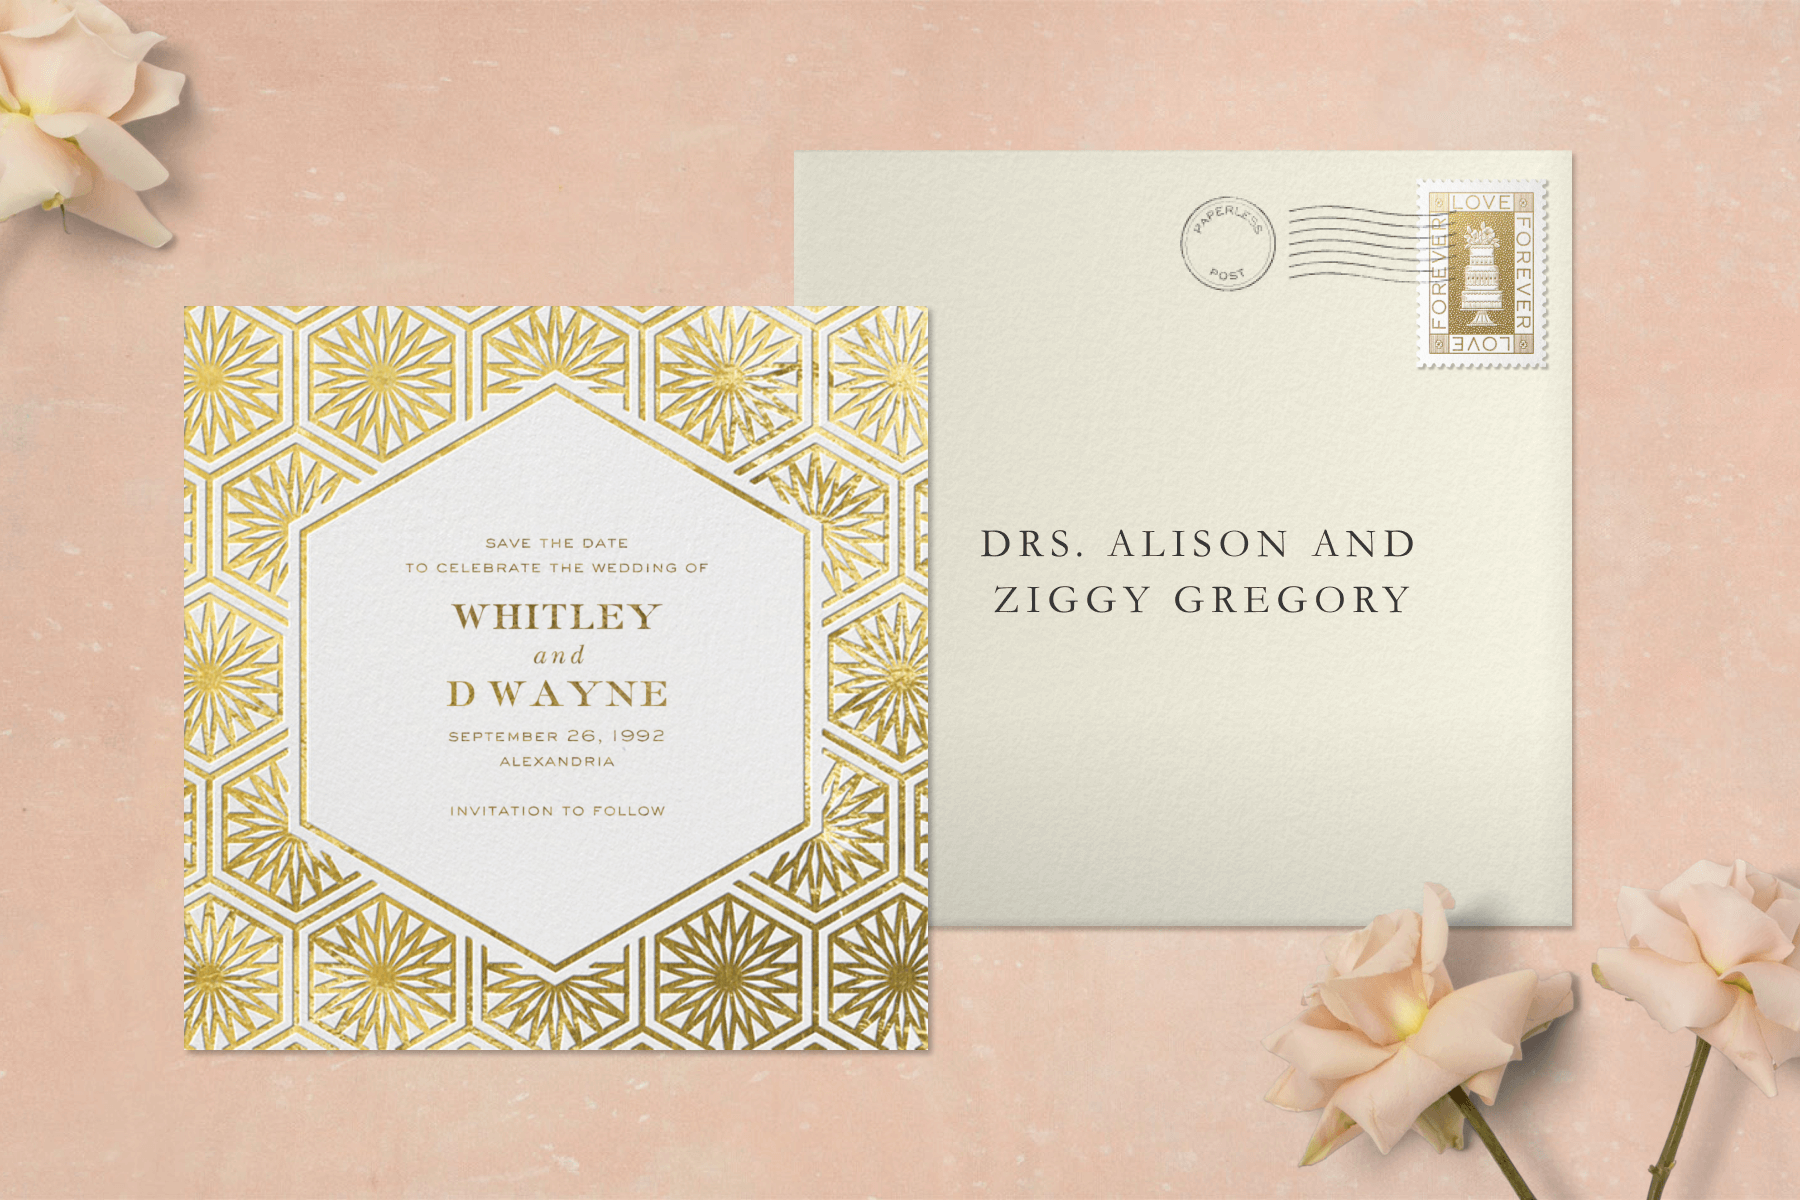 A square save the date card with a hexagonal border of gold sunburst shapes, beside a cream addressed envelope on a pale pink background with roses in two corners.